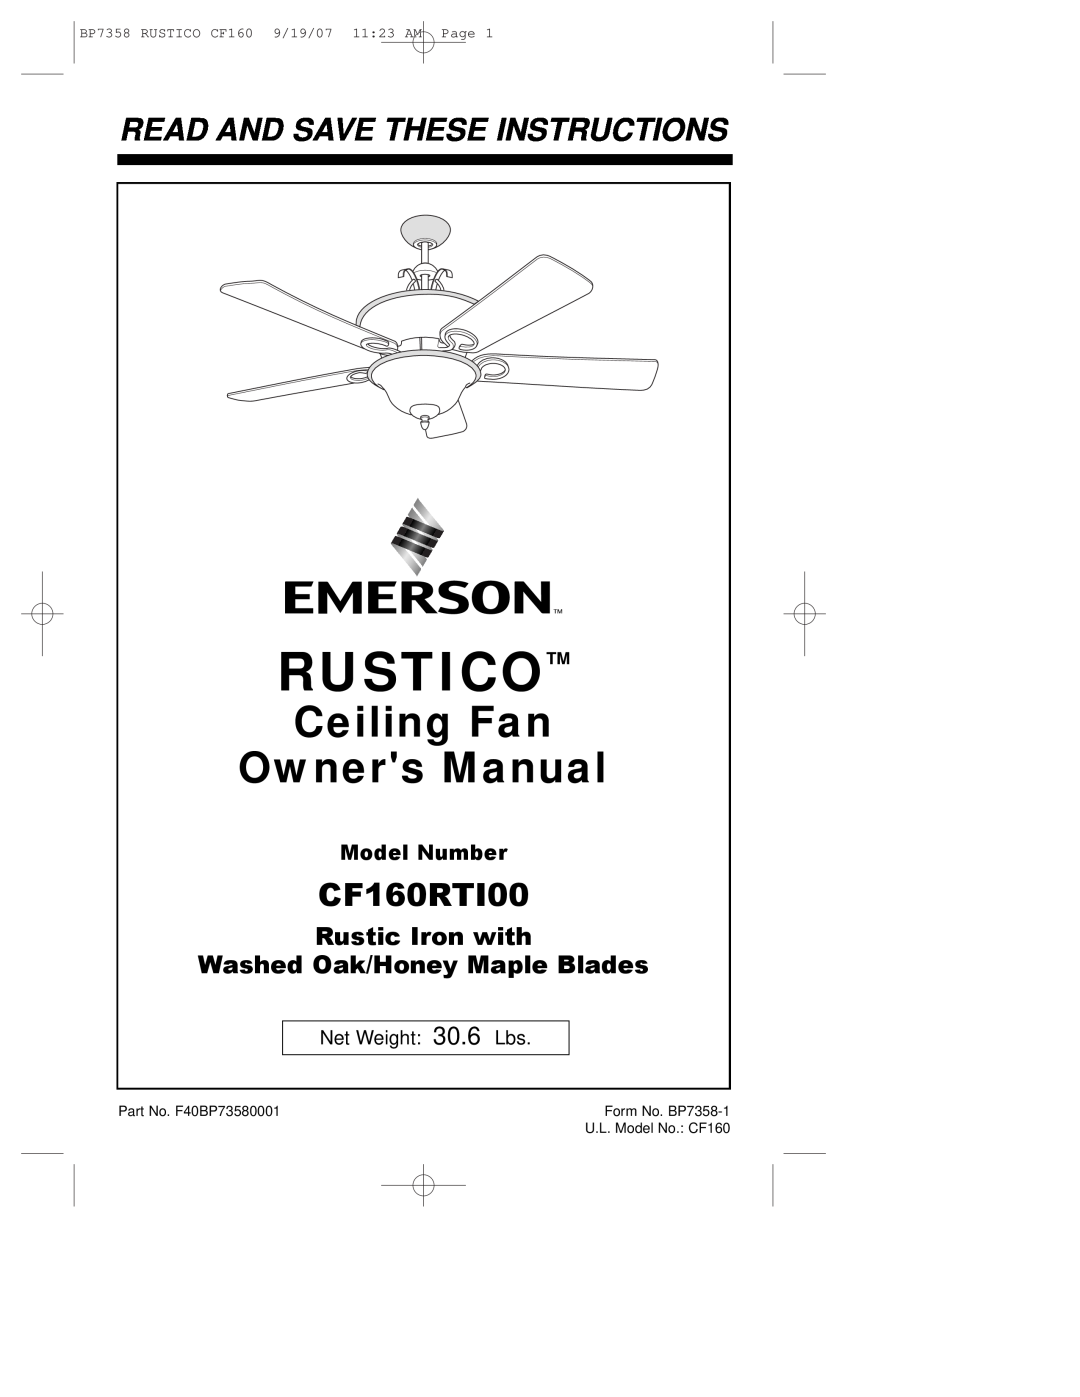 Emerson owner manual Rustico, CF160RTI00, Read And Save These Instructions, Model Number, Net Weight 30.6 Lbs 